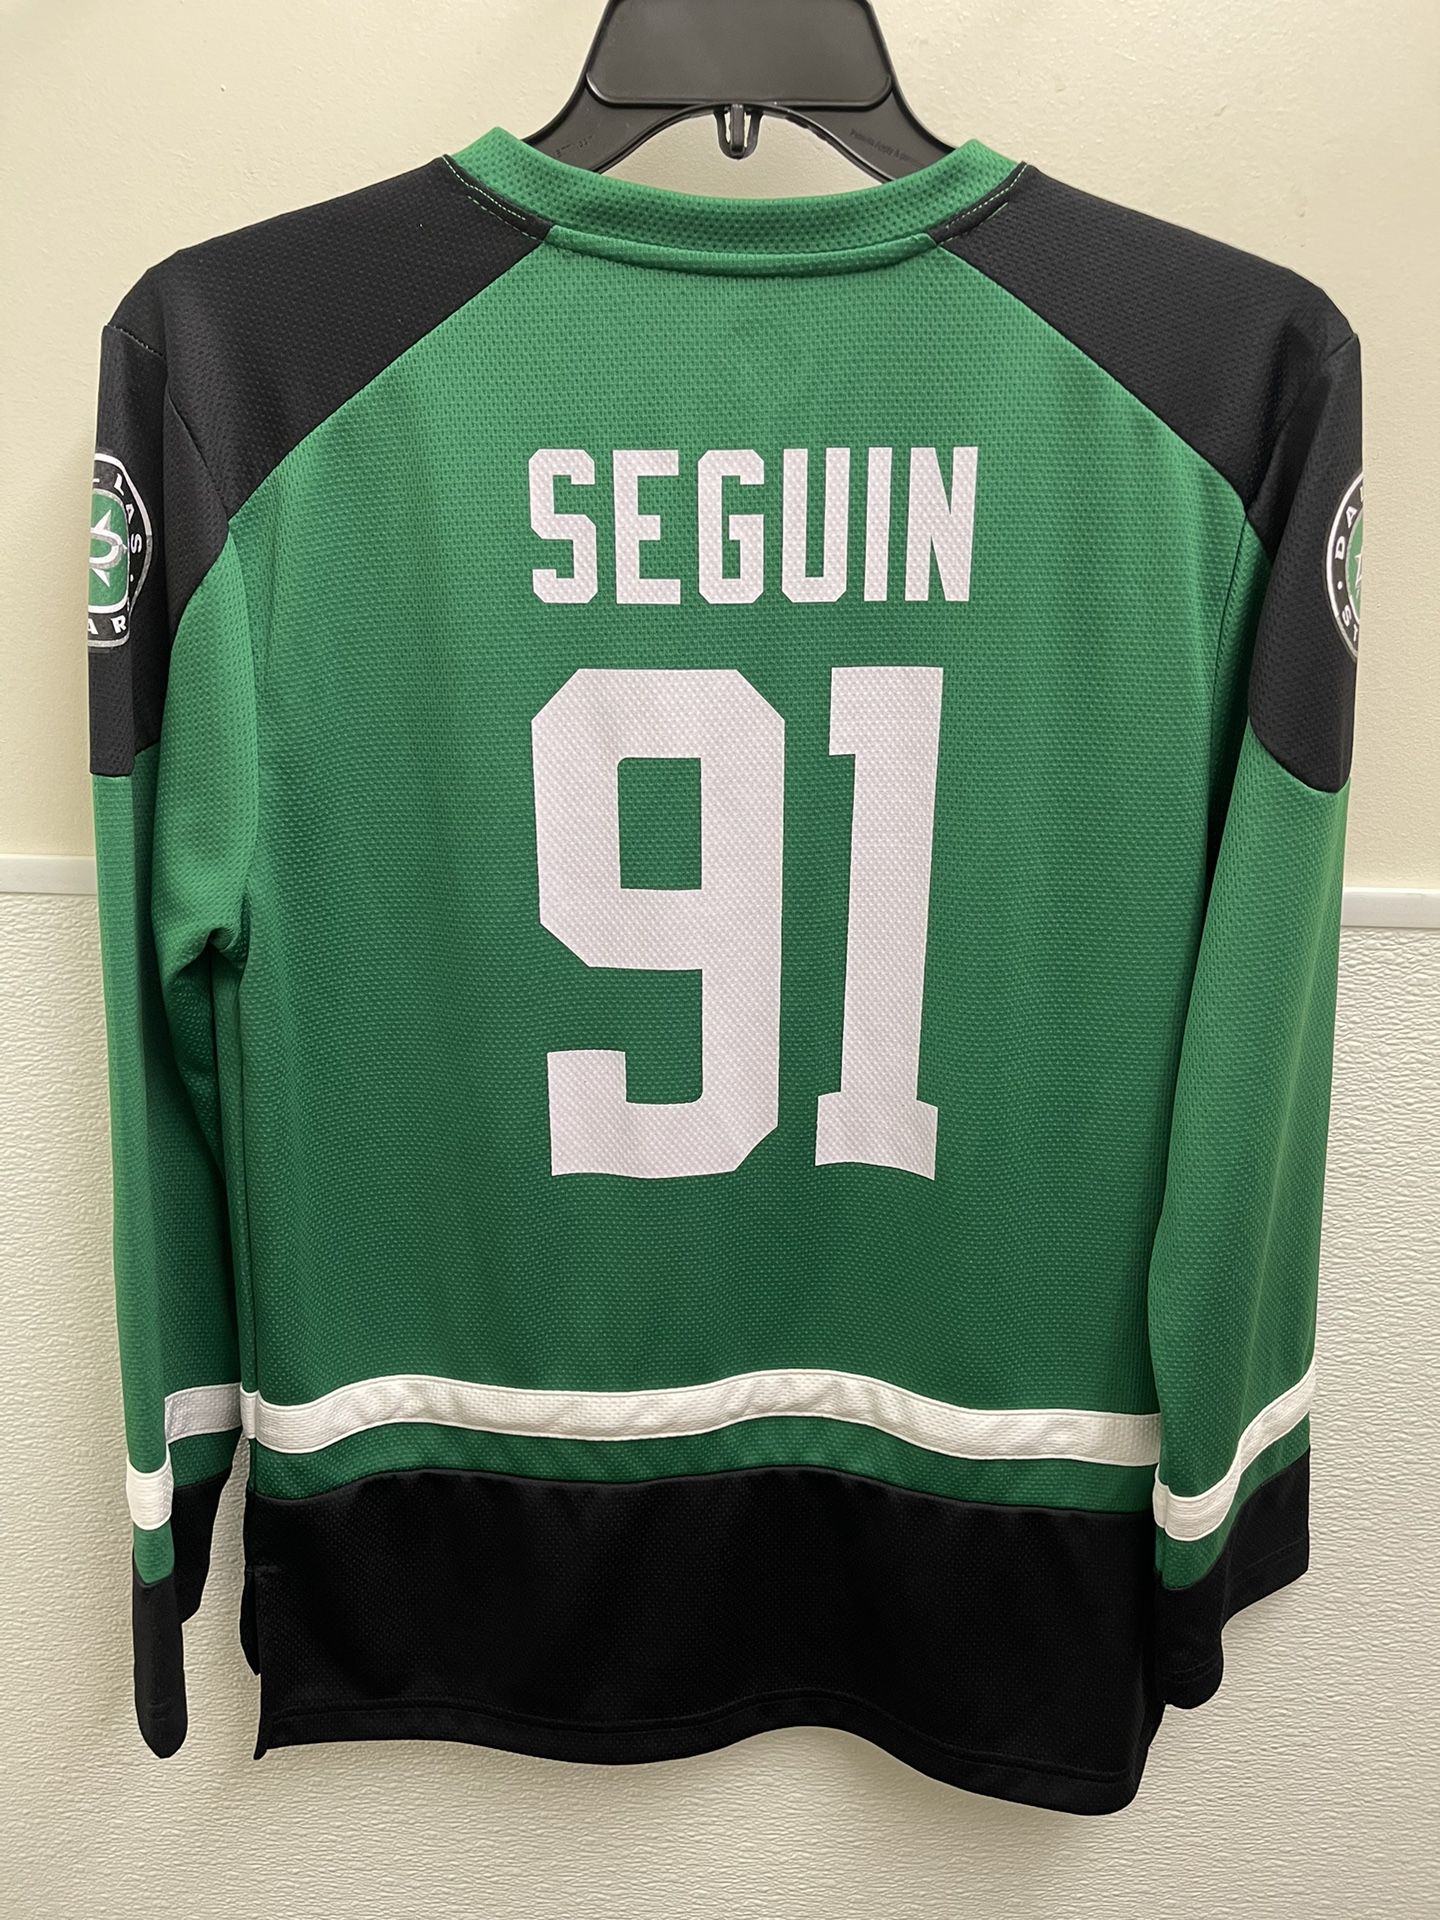 Youth Dallas Stars CCM Hockey Jersey for Sale in Scarsdale, NY - OfferUp